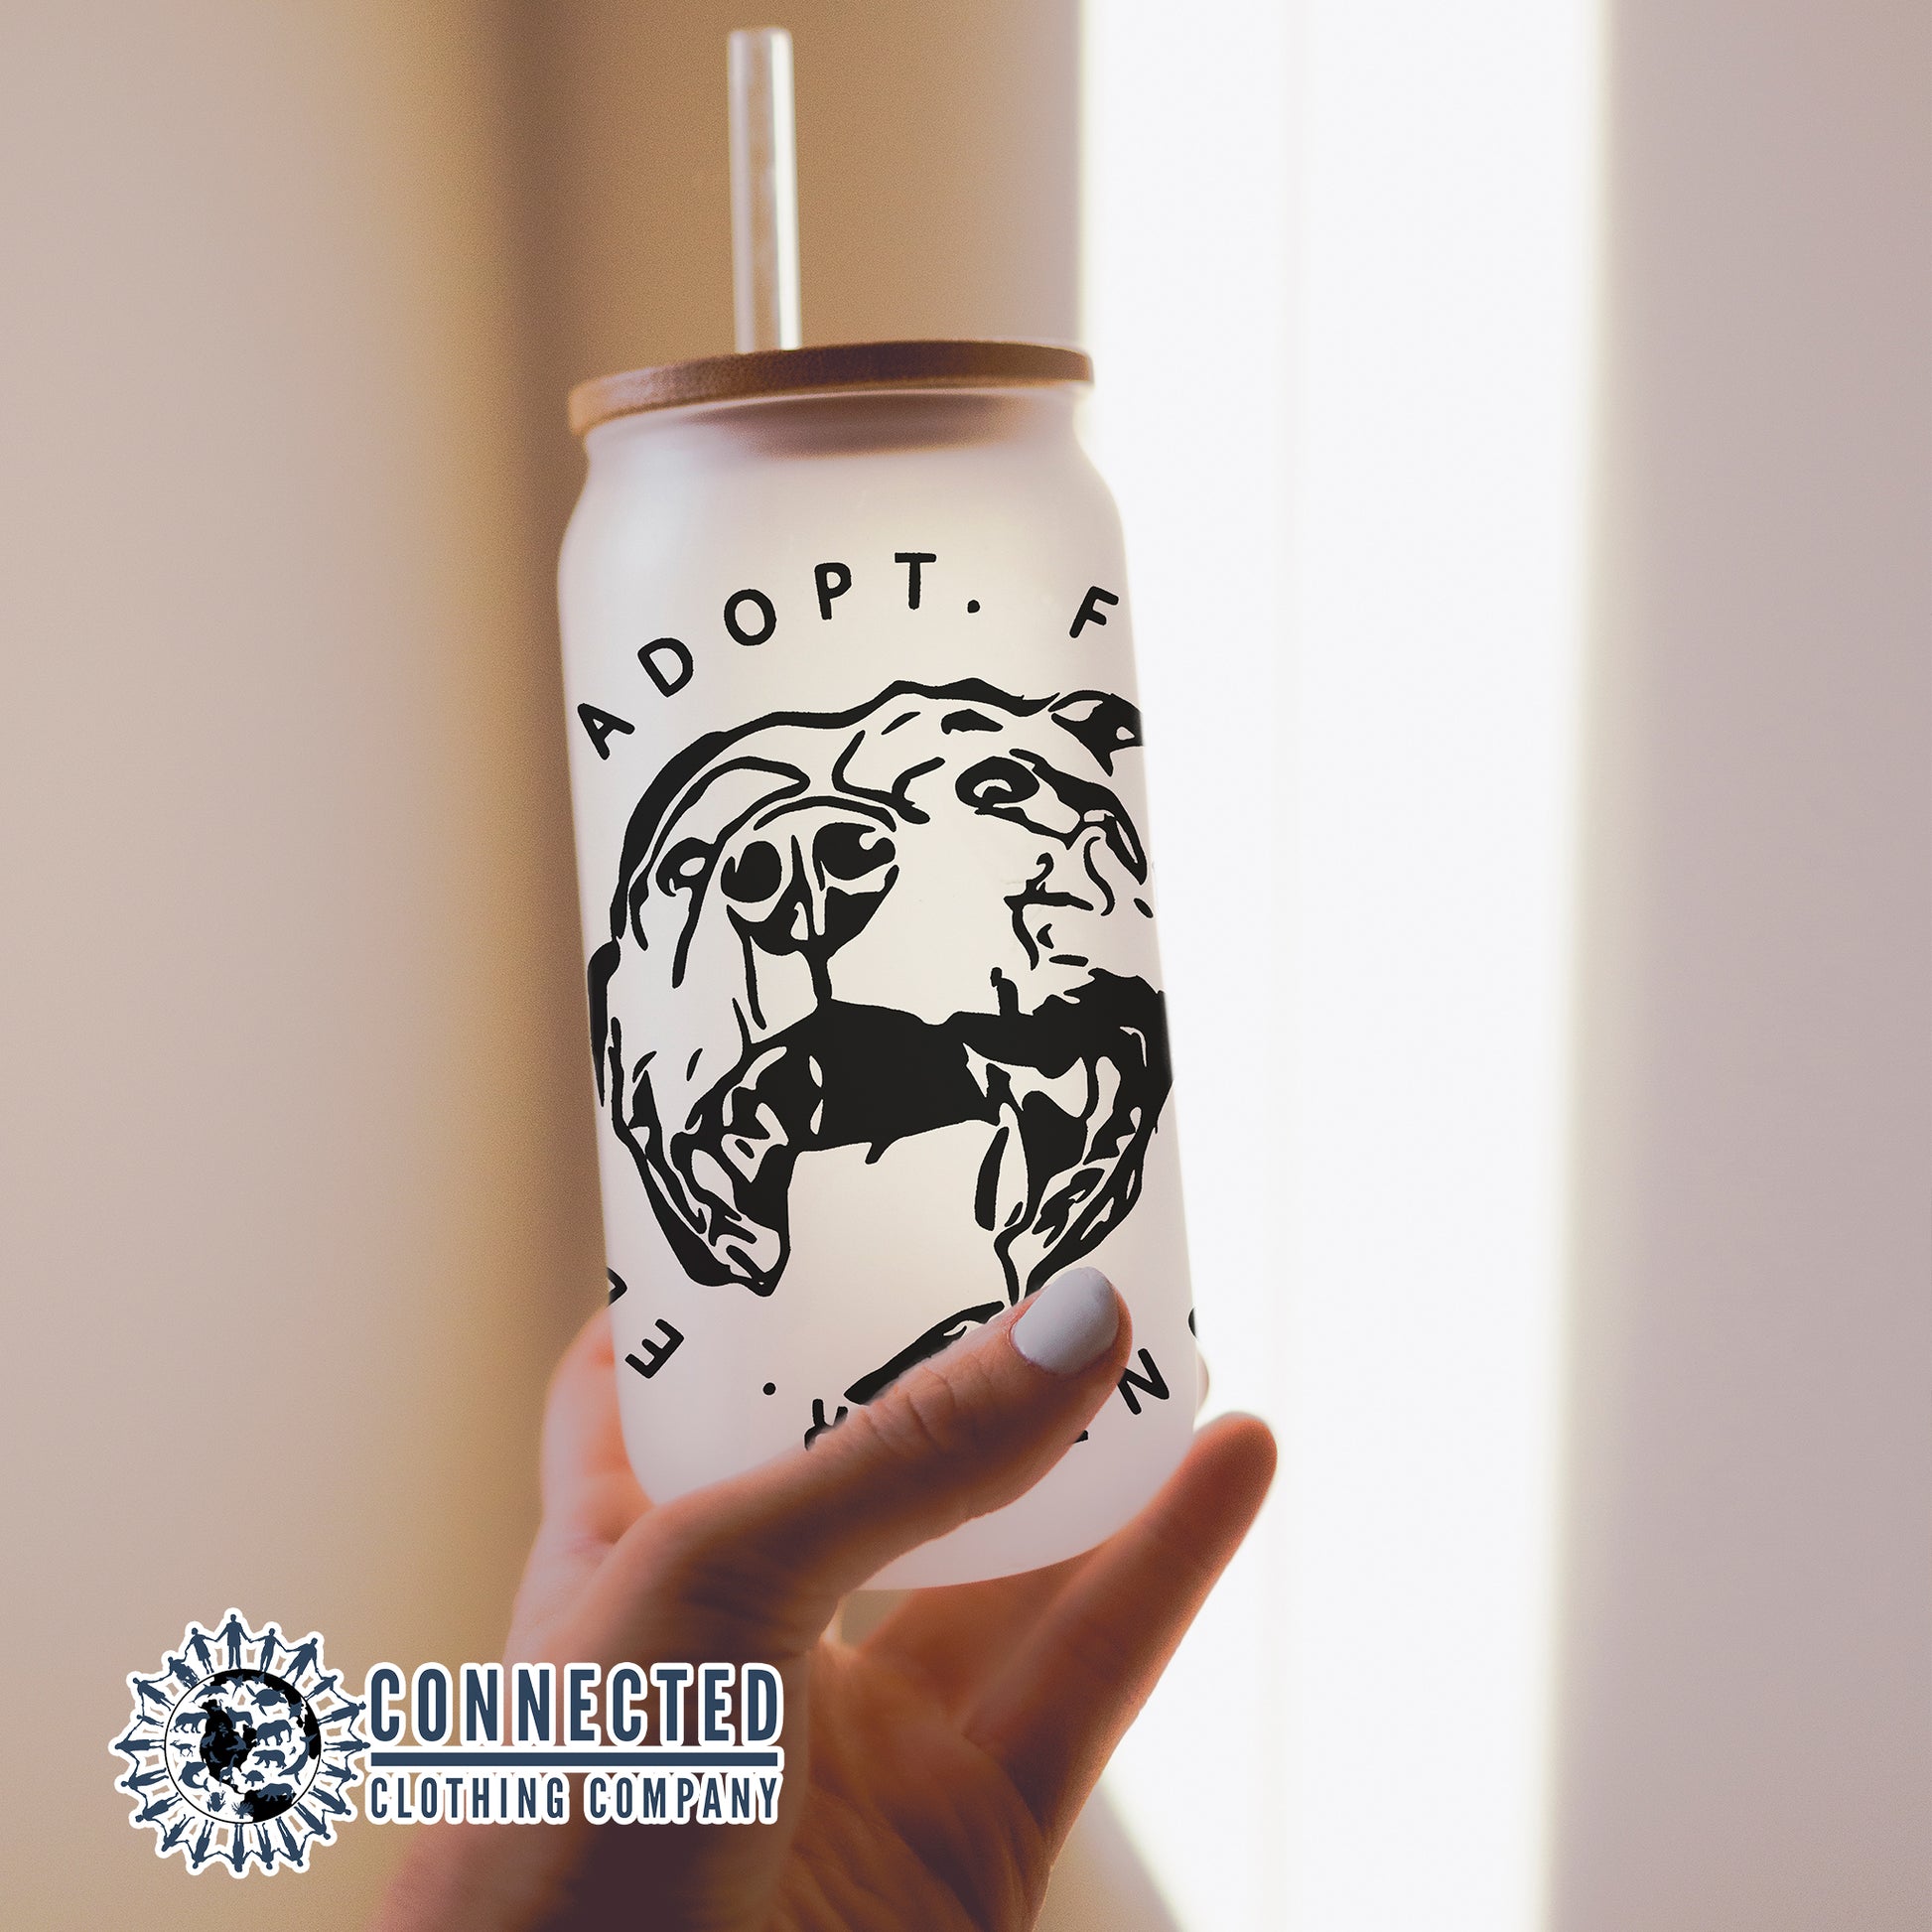 Adopt Educate Foster Volunteer Glass Can - sweetsherriloudesigns - 10% of the proceeds are donated to animal rescue